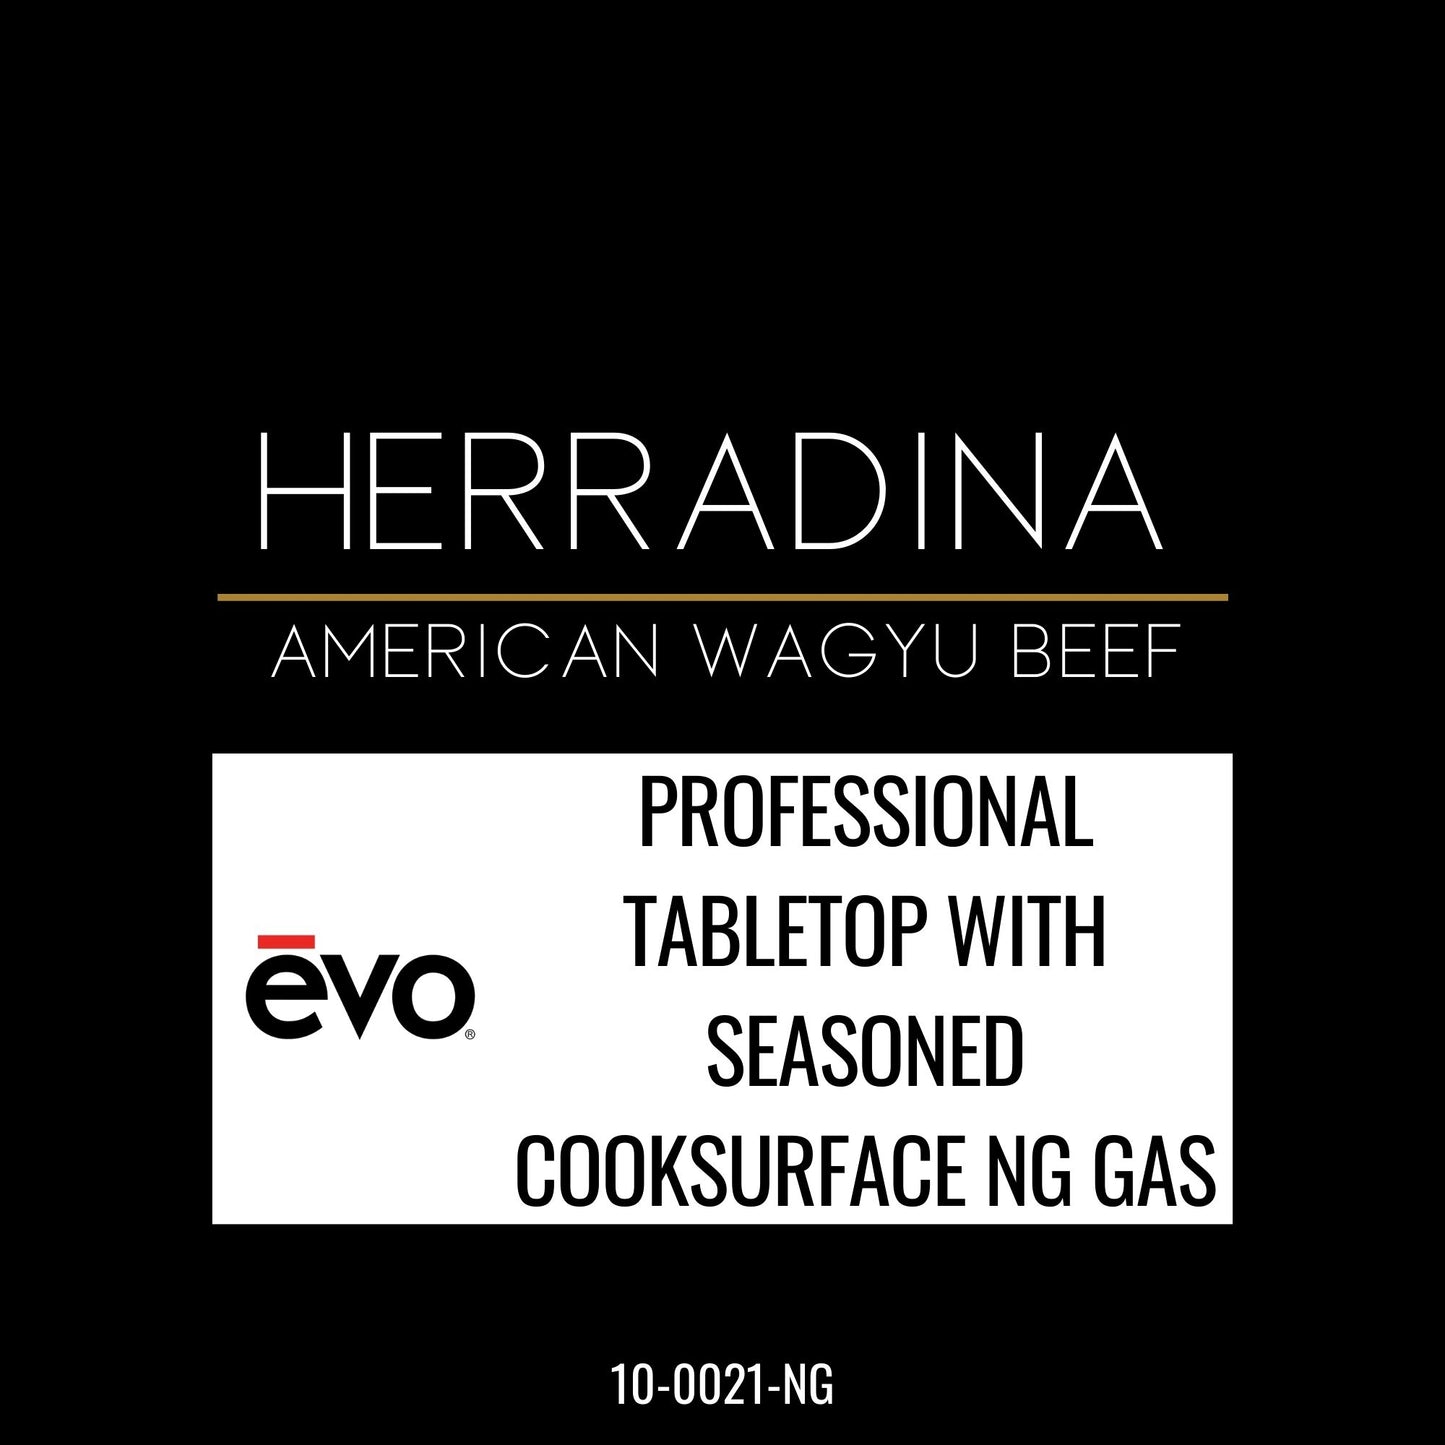 EVO PROFESSIONAL TABLETOP WITH SEASONED COOKSURFACE NG GAS